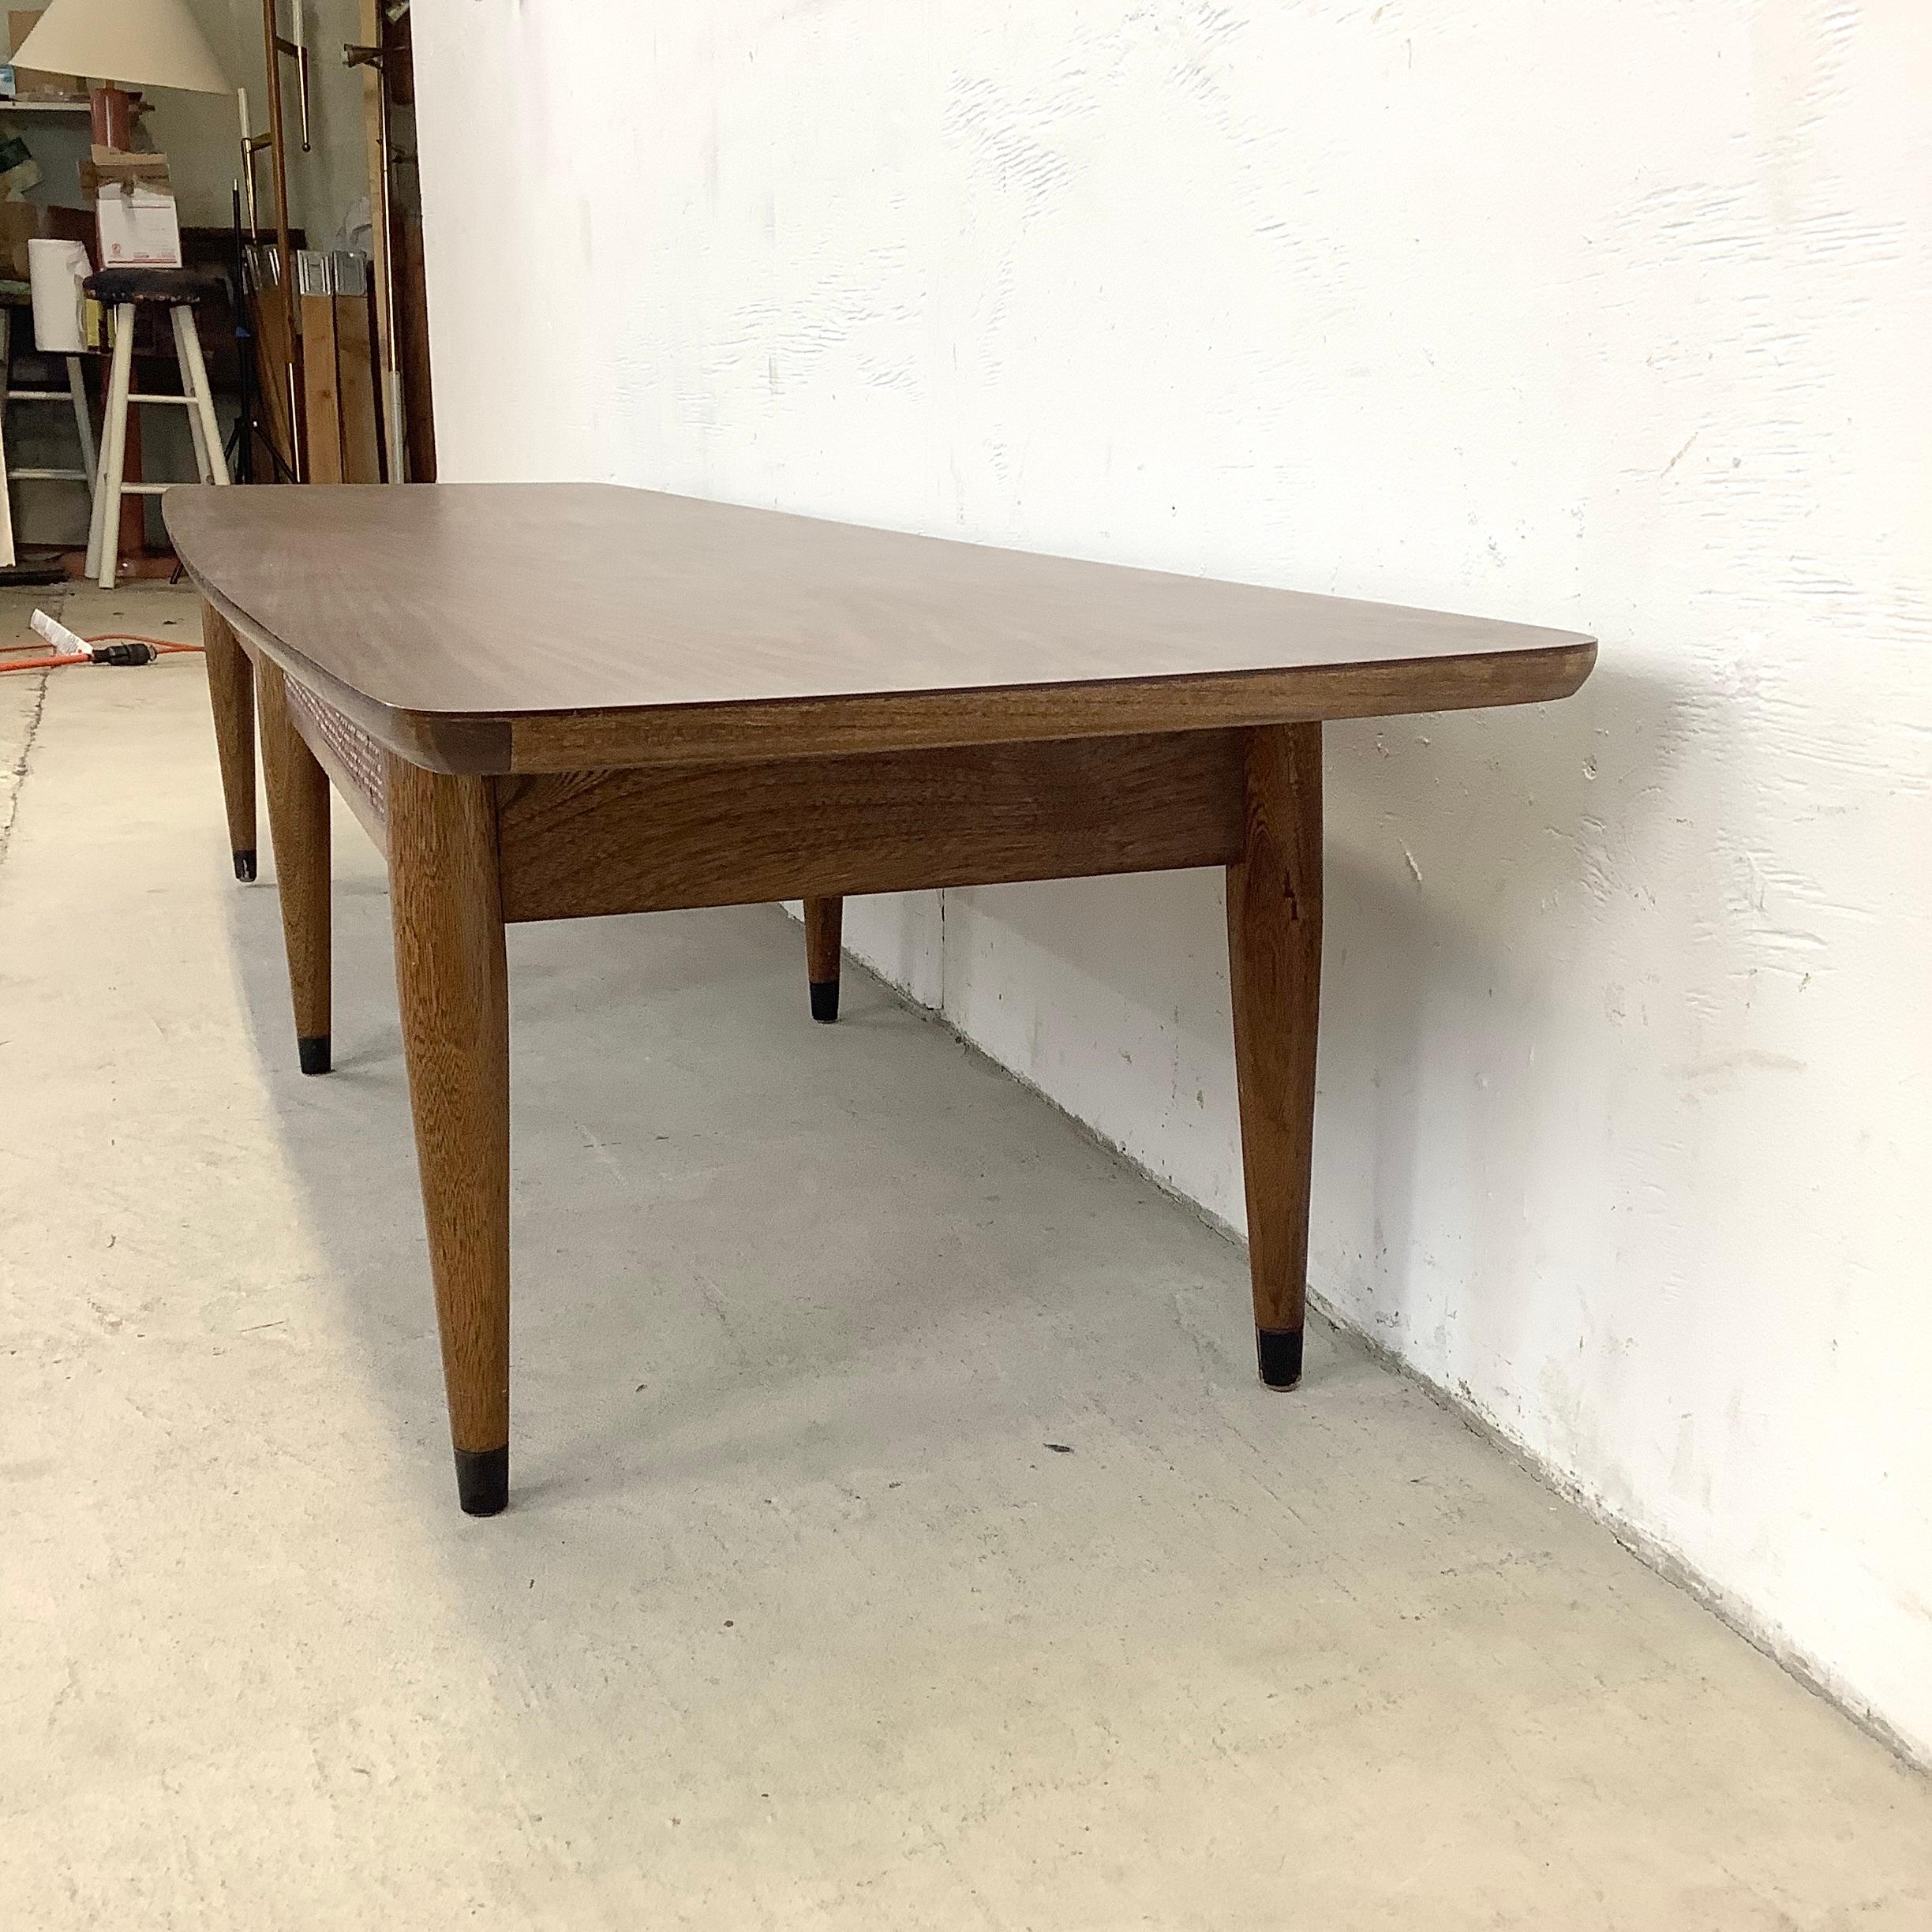 Long Midcentury Coffee Table with Dual Drawer Storage In Good Condition For Sale In Trenton, NJ